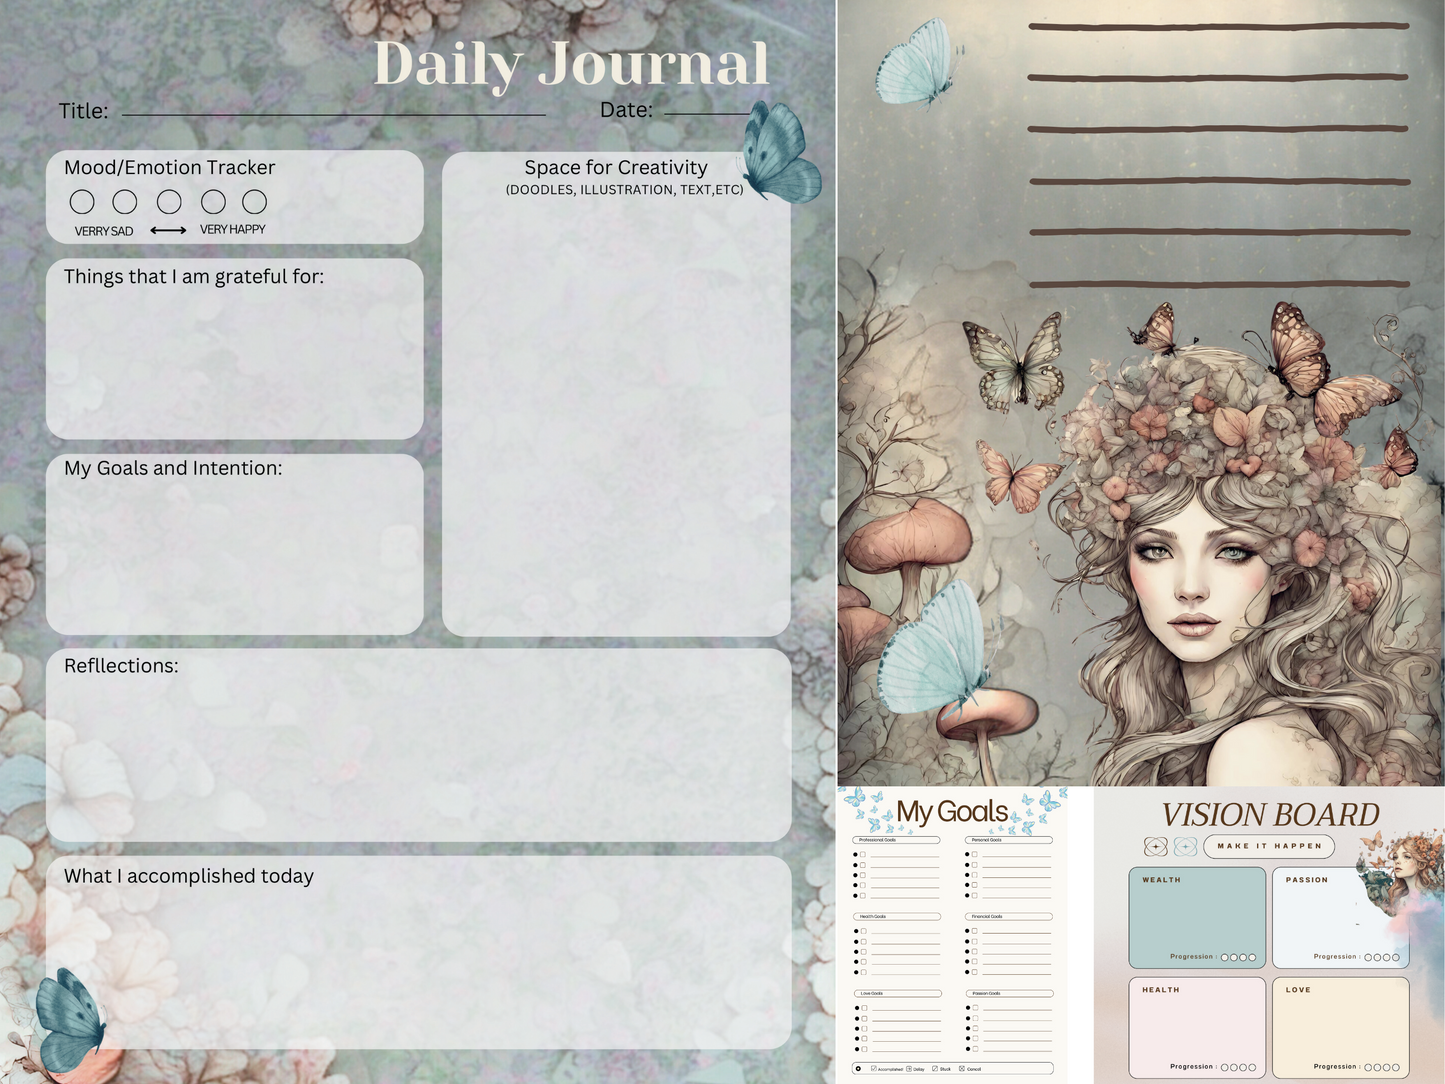 Fairy & Butterfly Bullet Journal Printable Download Fairy Journal 25 Page Set